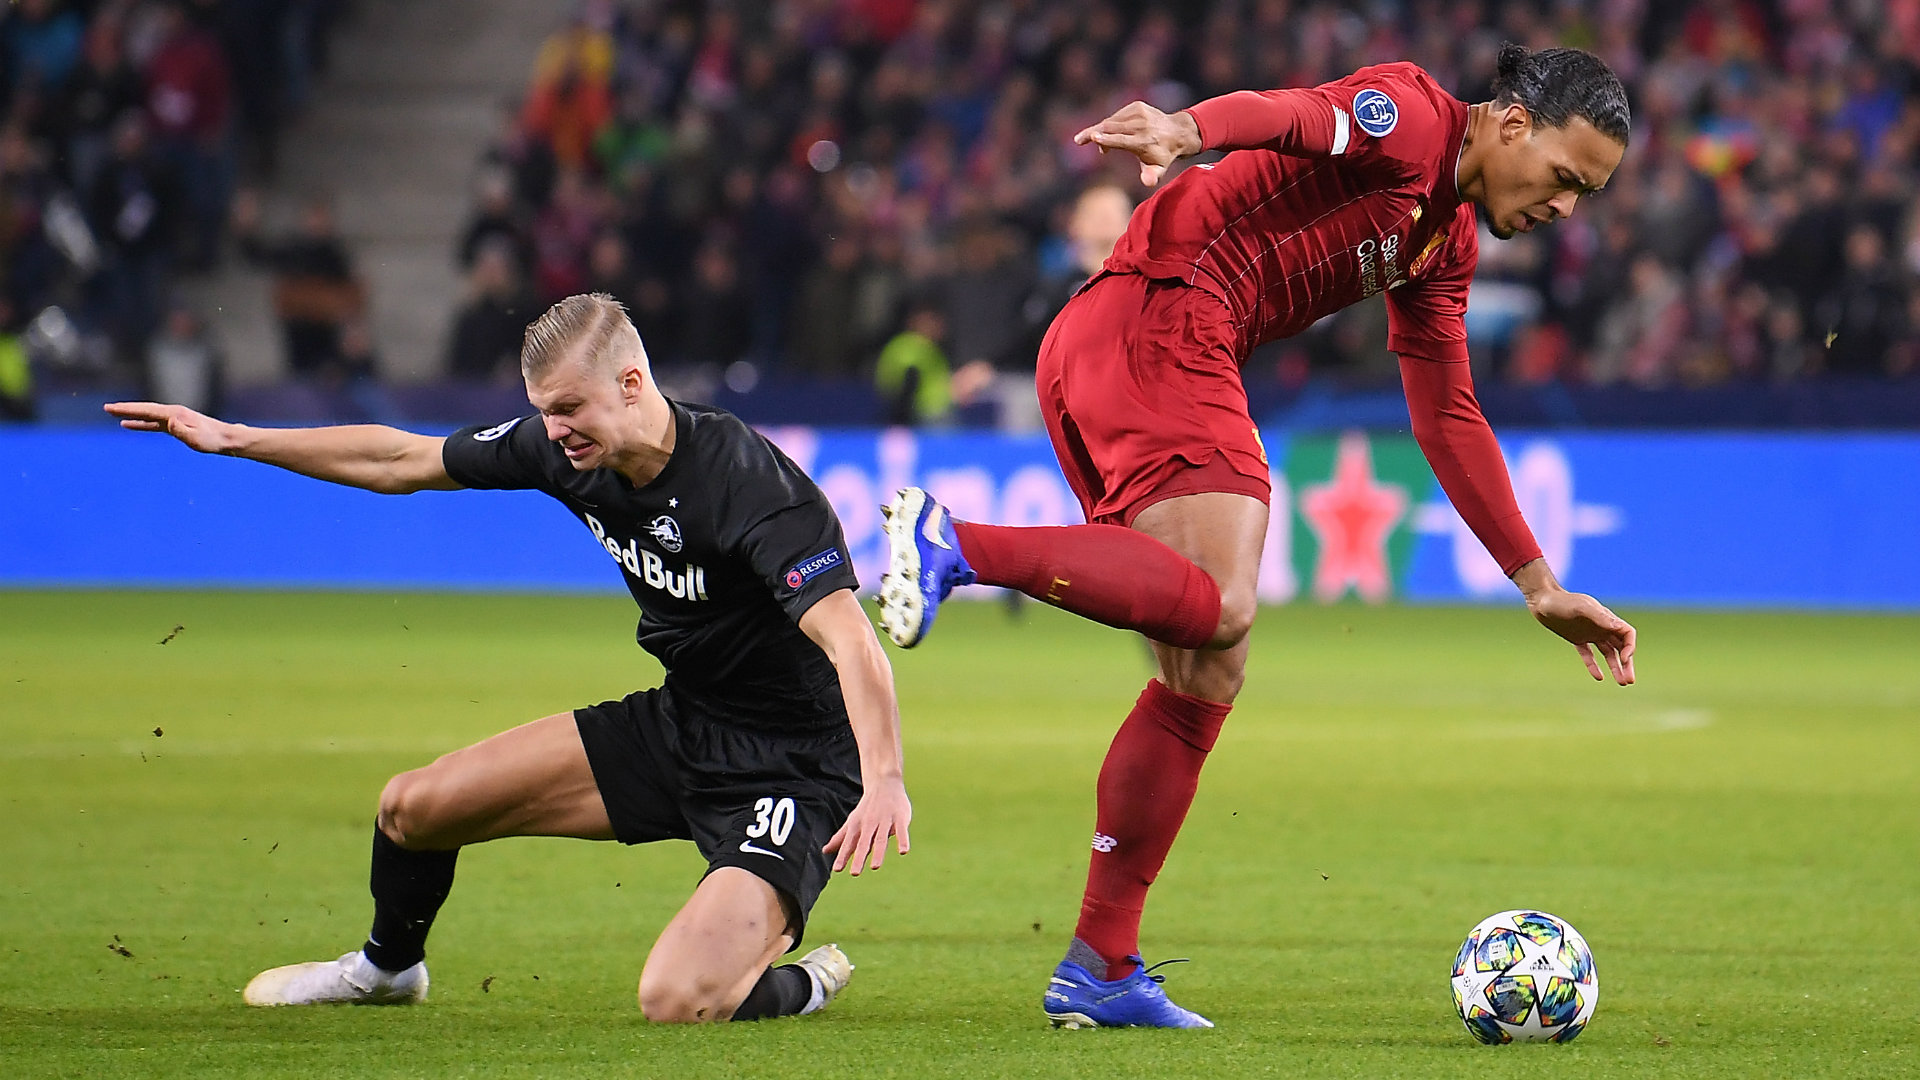 Erling Braut Haaland in action against Liverpool. (GETTY Images)